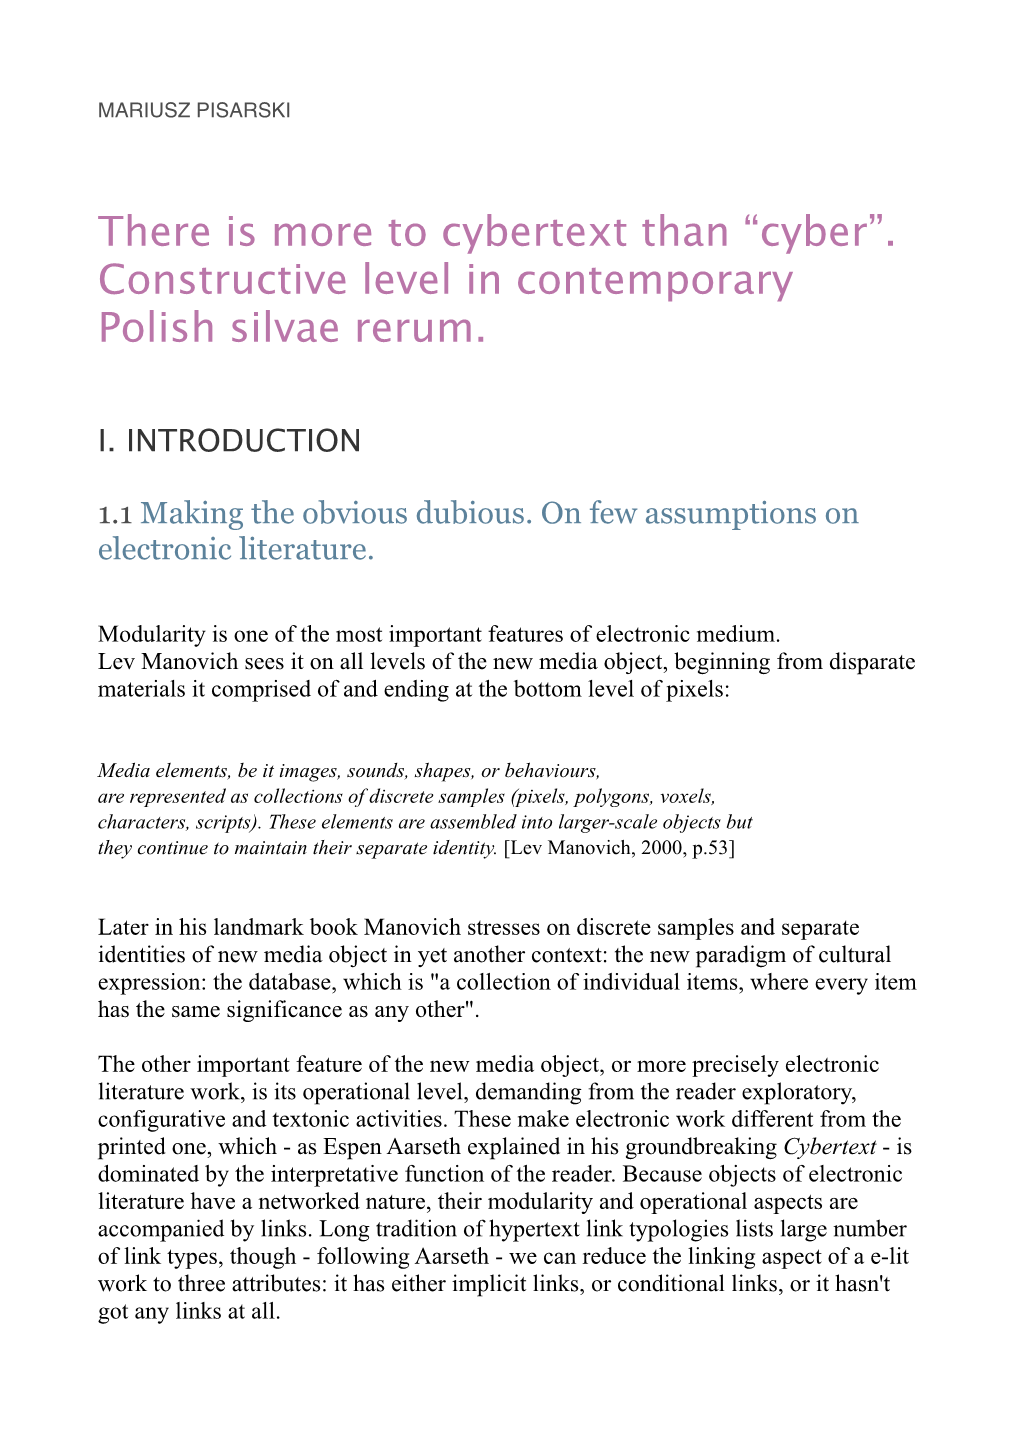 There Is More to Cybertext Than “Cyber”. Constructive Level in Contemporary Polish Silvae Rerum